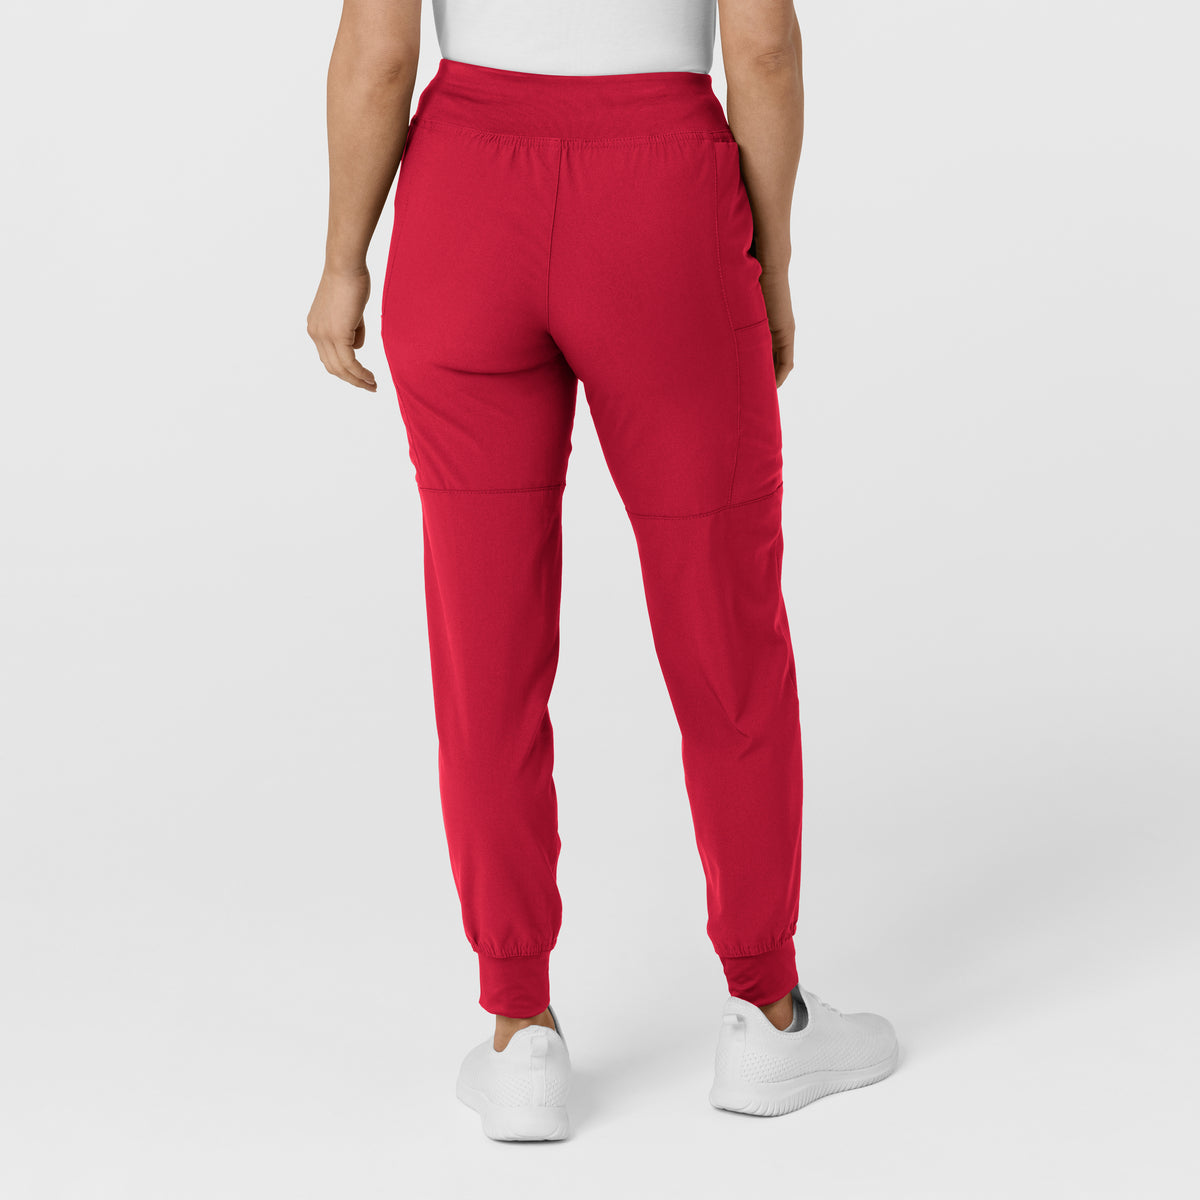 W123 Women's Comfort Waist Cargo Jogger Scrub Pant Red back view